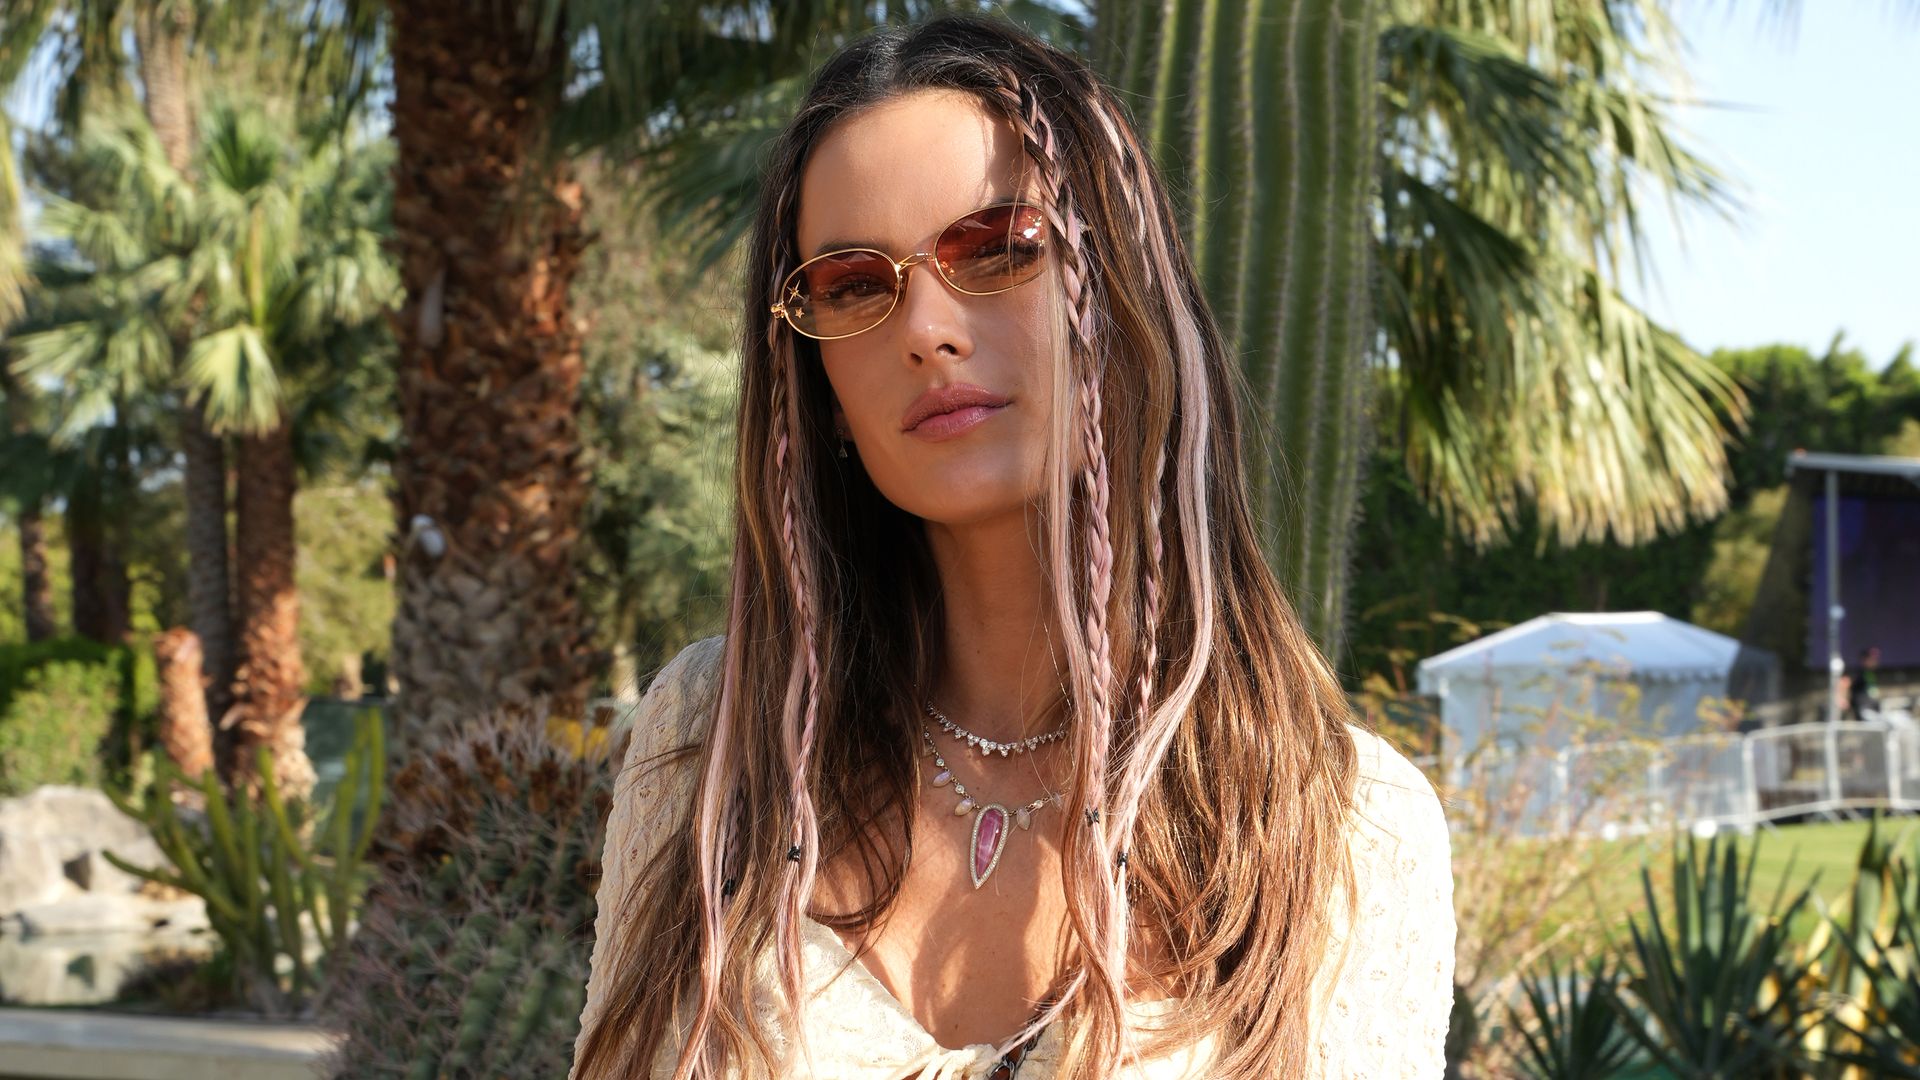 Festival hairstyles: 15 striking looks to try this summer